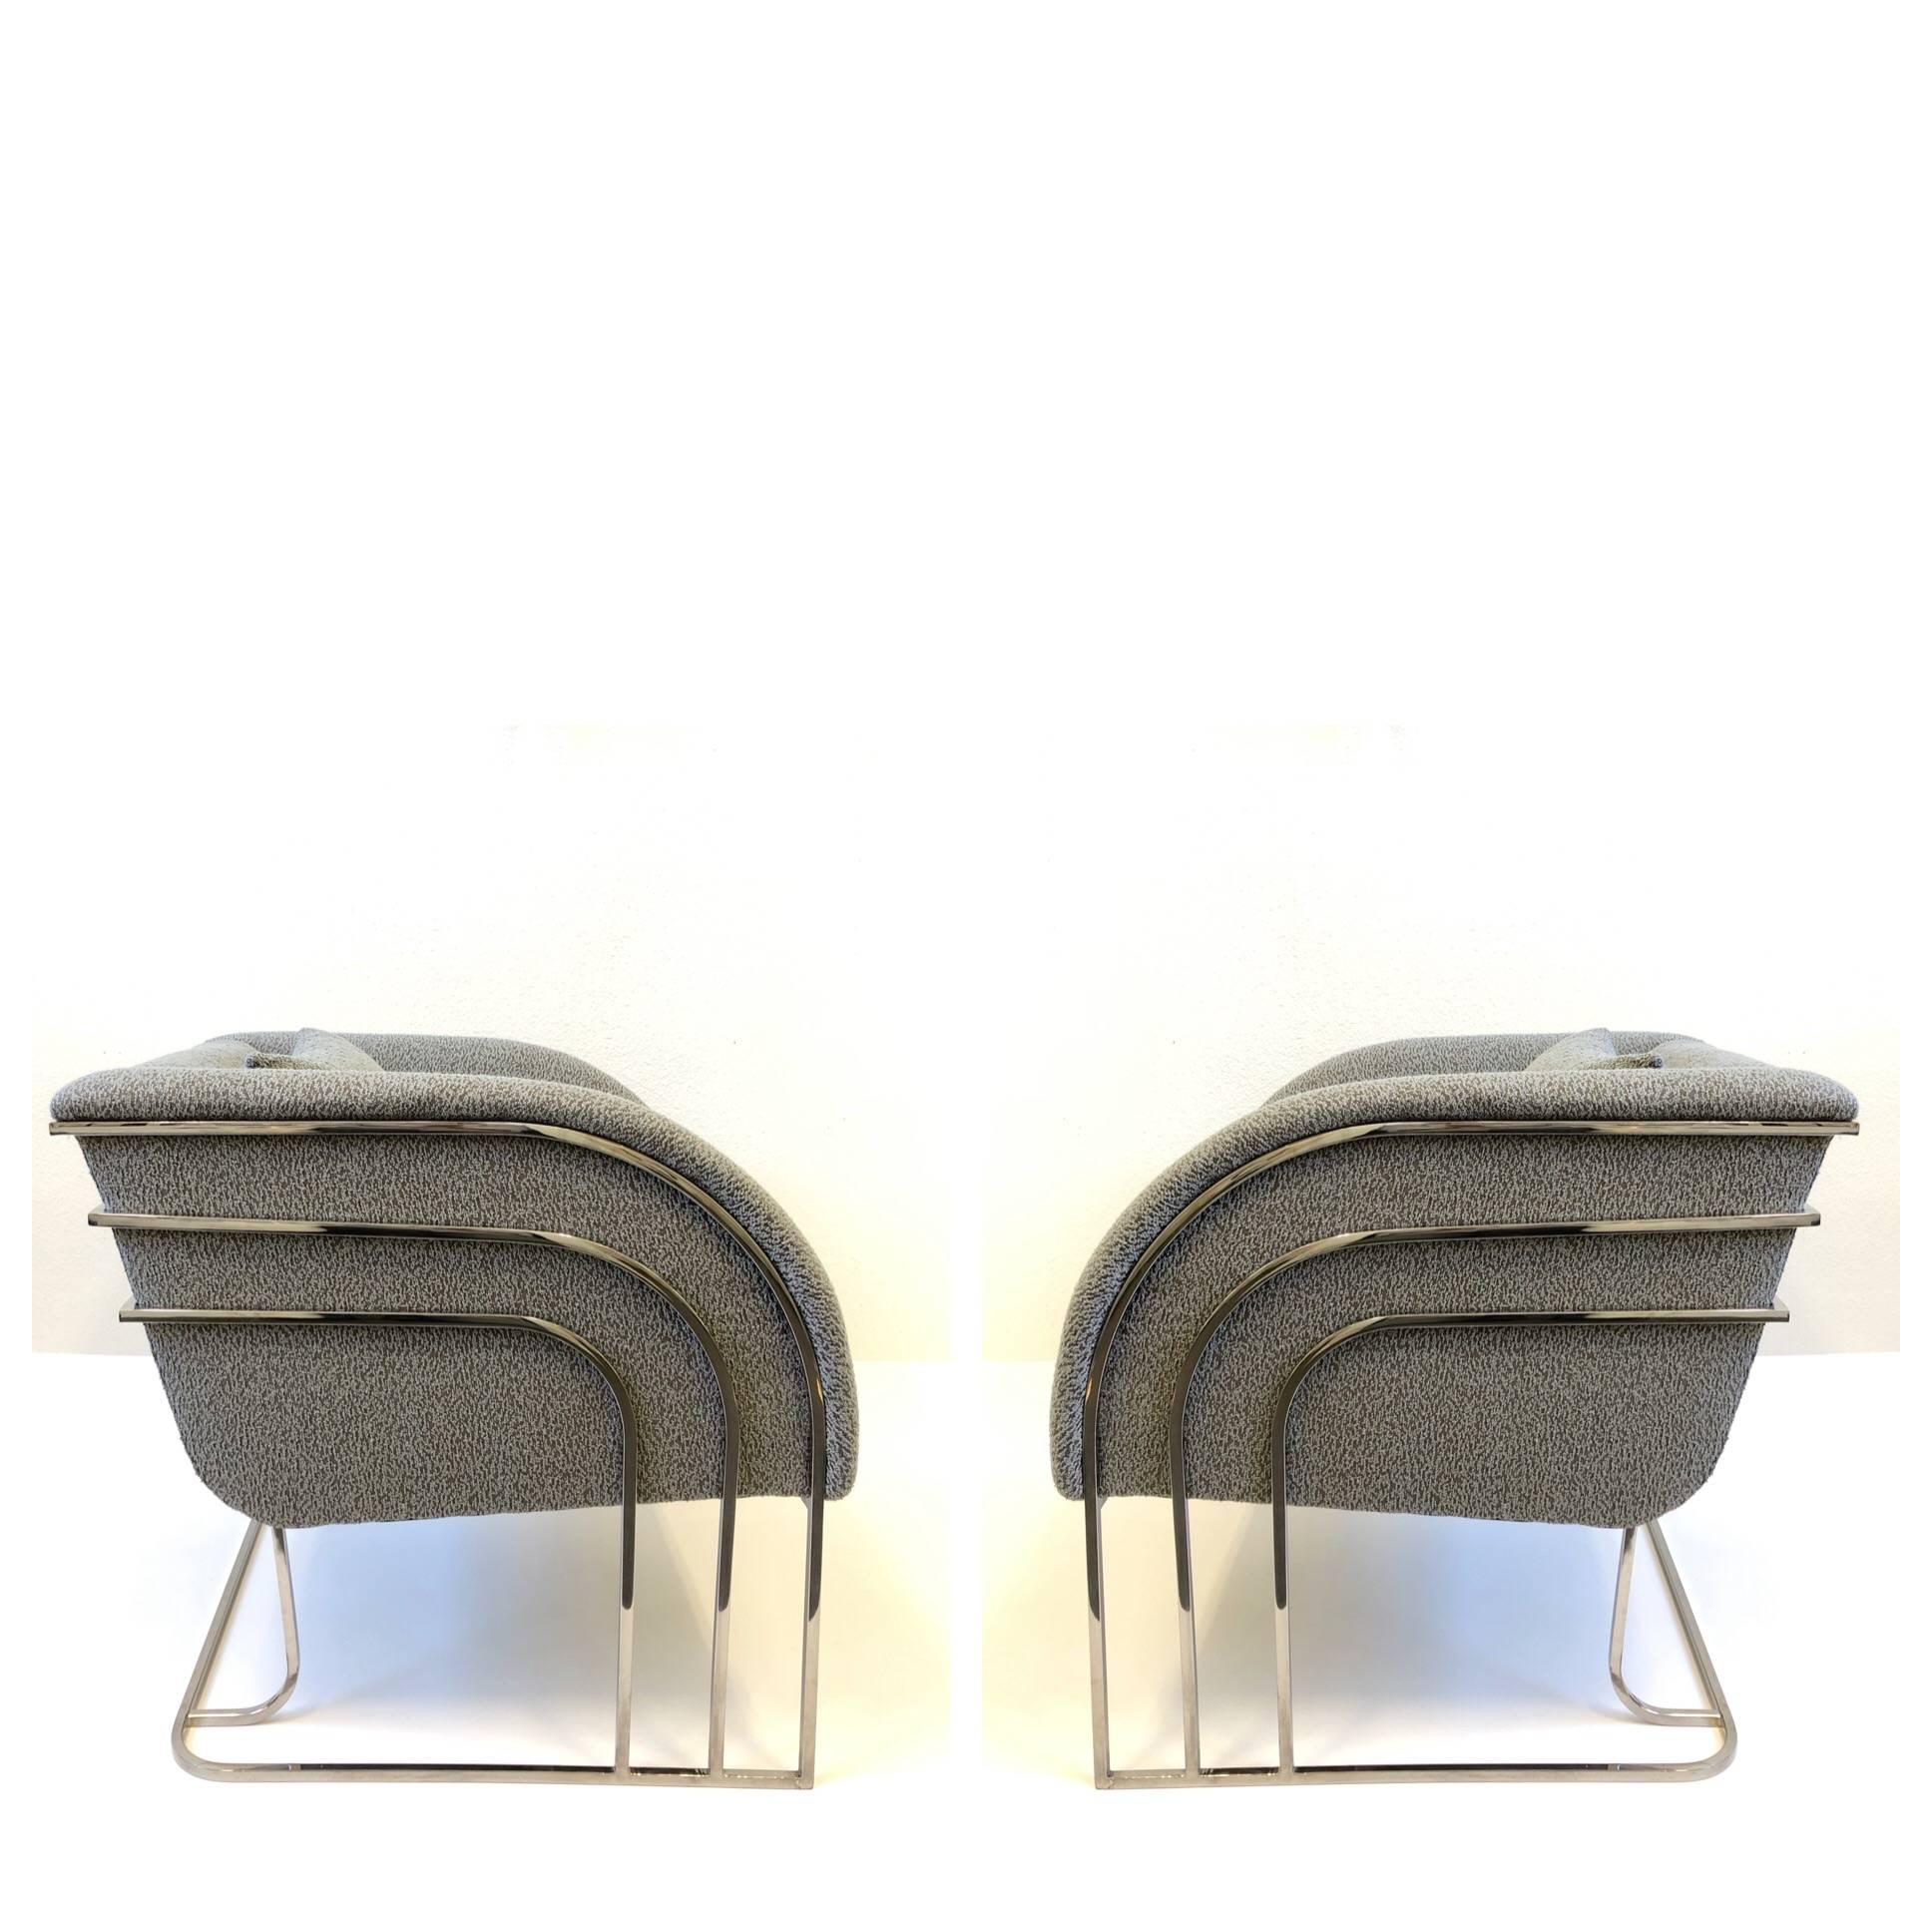 A Rare glamorous pair of polish chrome and fabric lounge chairs. Designed in the 1970s by George Mergenov for Weiman/Warren Lloyd. Newly recovered with a gray nubby fabric (see detail photos)

Dimension: 27” high 27” wide 28” deep 19” seat.